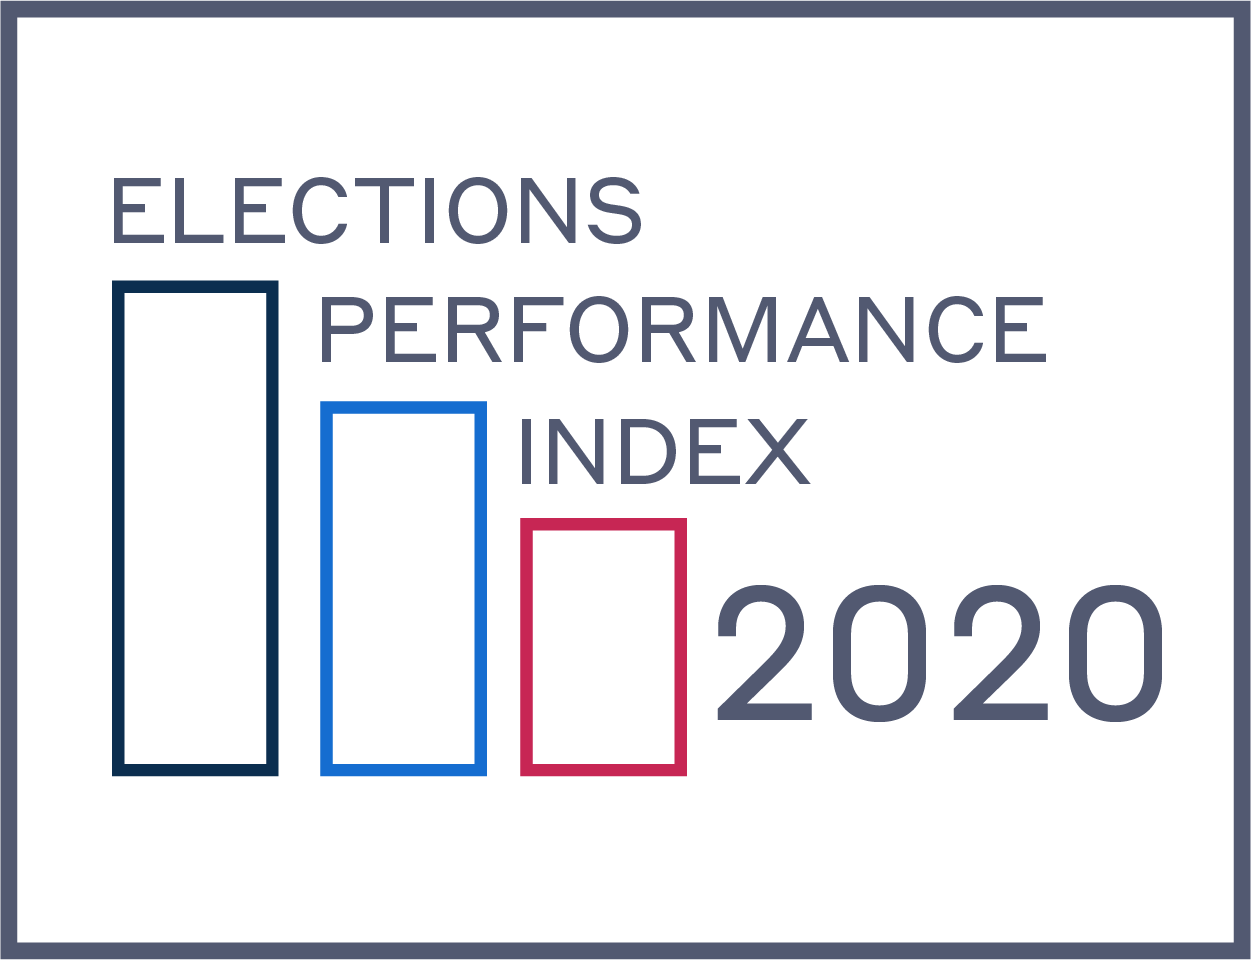 Image of the Elections Performance Index logo